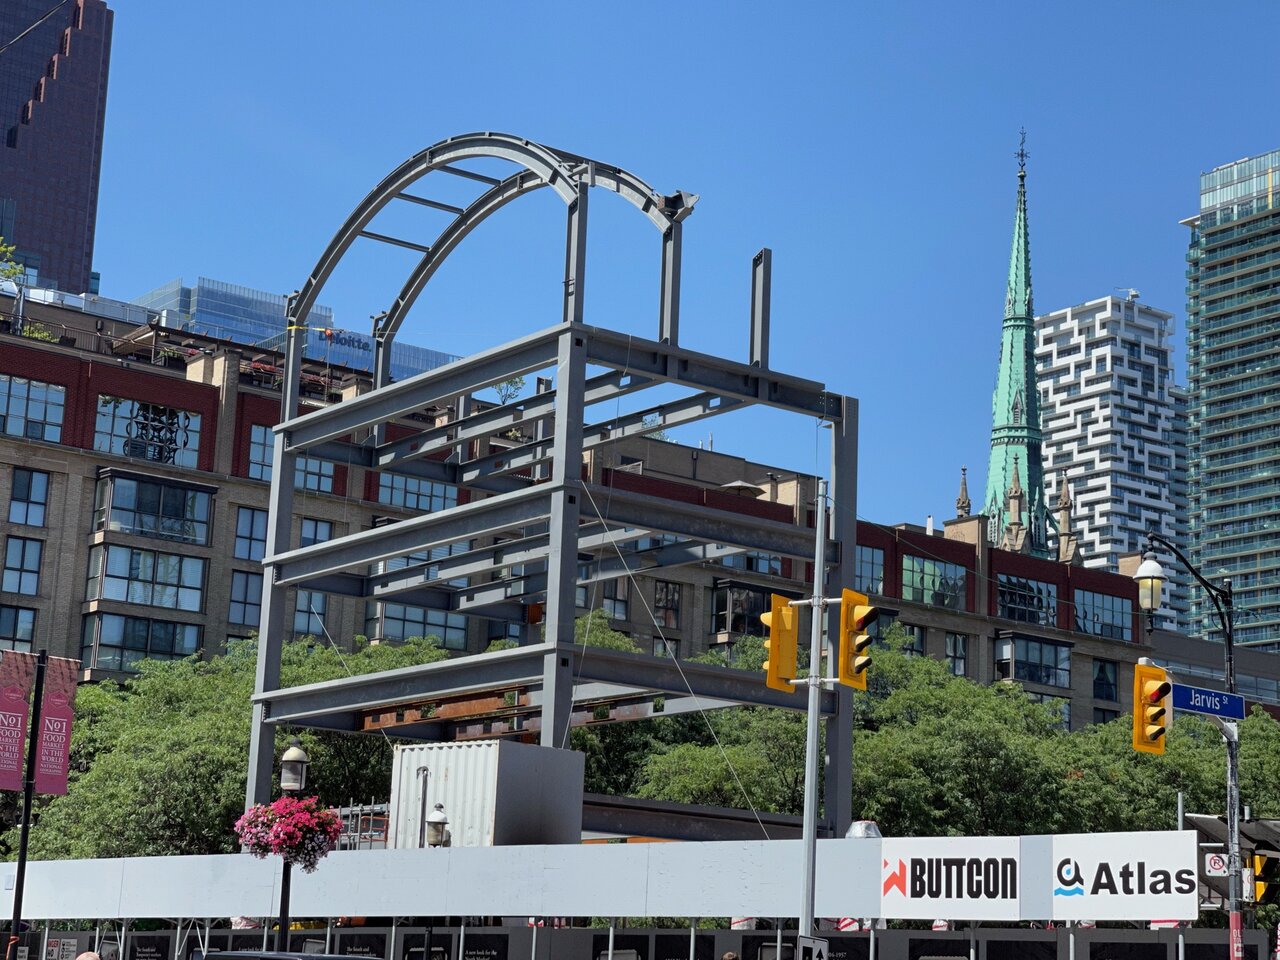 Steel rising at the St Lawrence Market North building site in Downtown Toronto, image by UT Forum contributor Benito